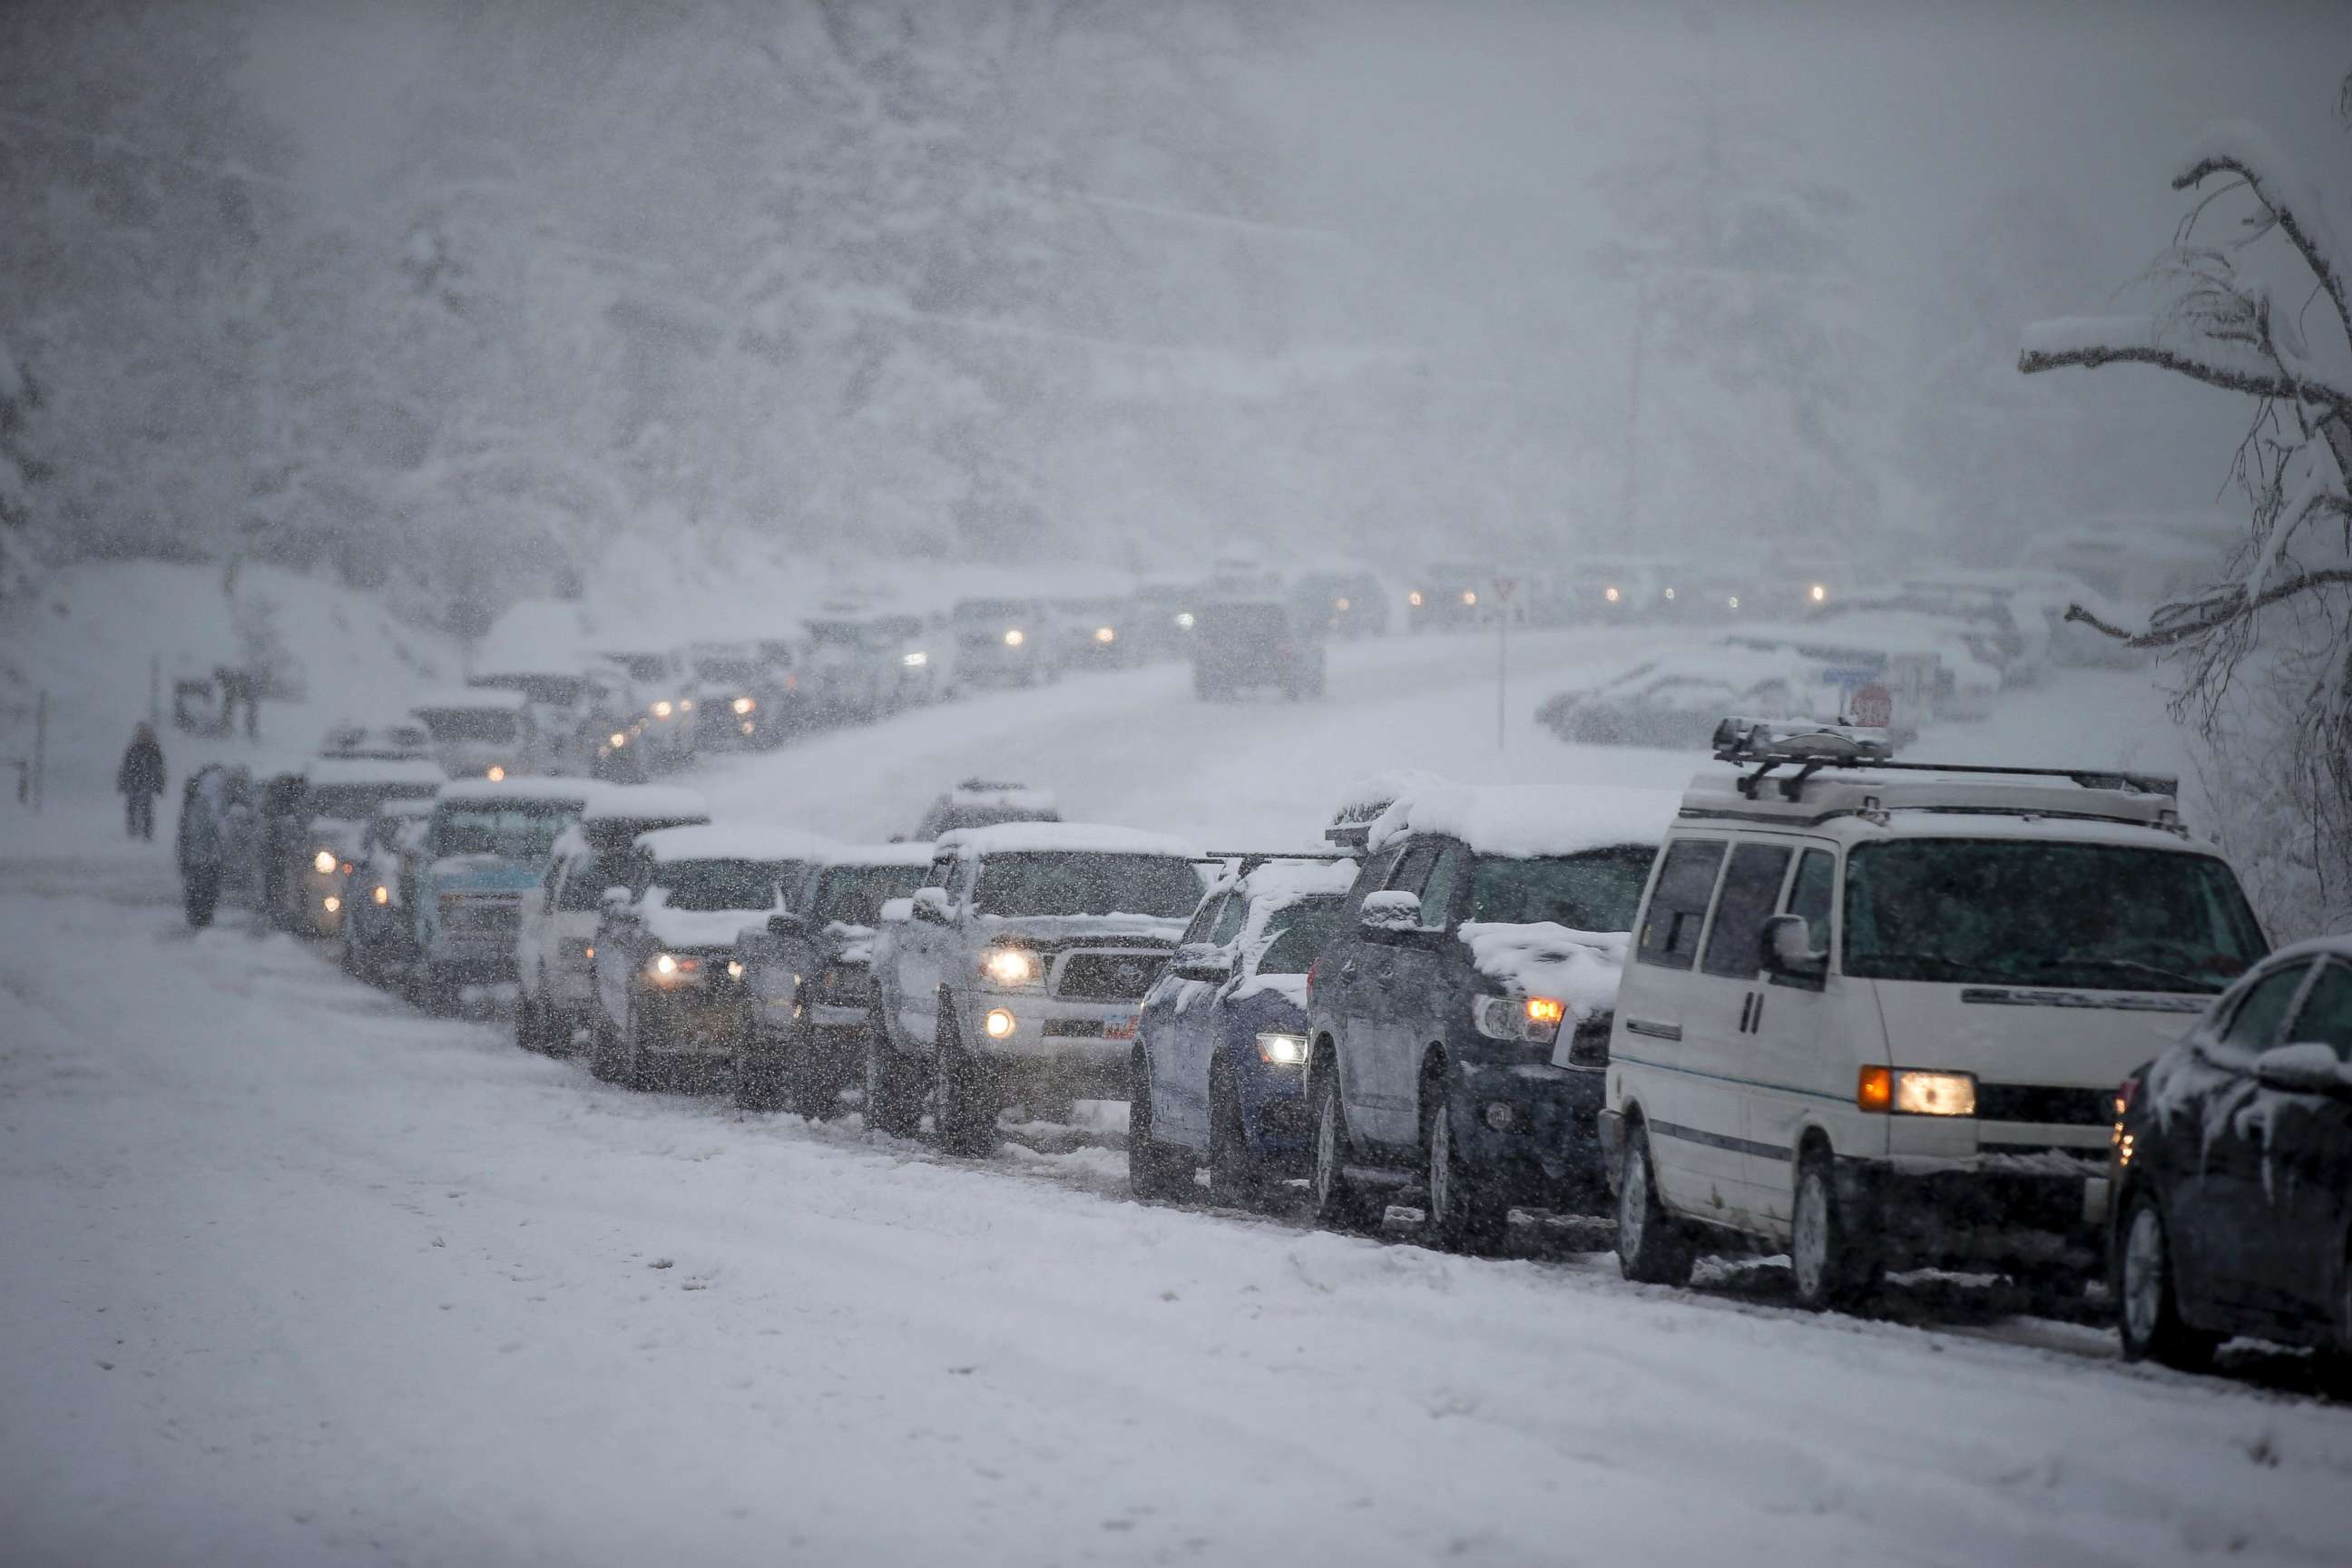 PHOTO: Traffic is backed up in all directions at the mouth of Big Cottonwood Canyon, west of Salt Lake City, as the canyon experiences intermittent closures during a winter storm, Jan. 21, 2019.